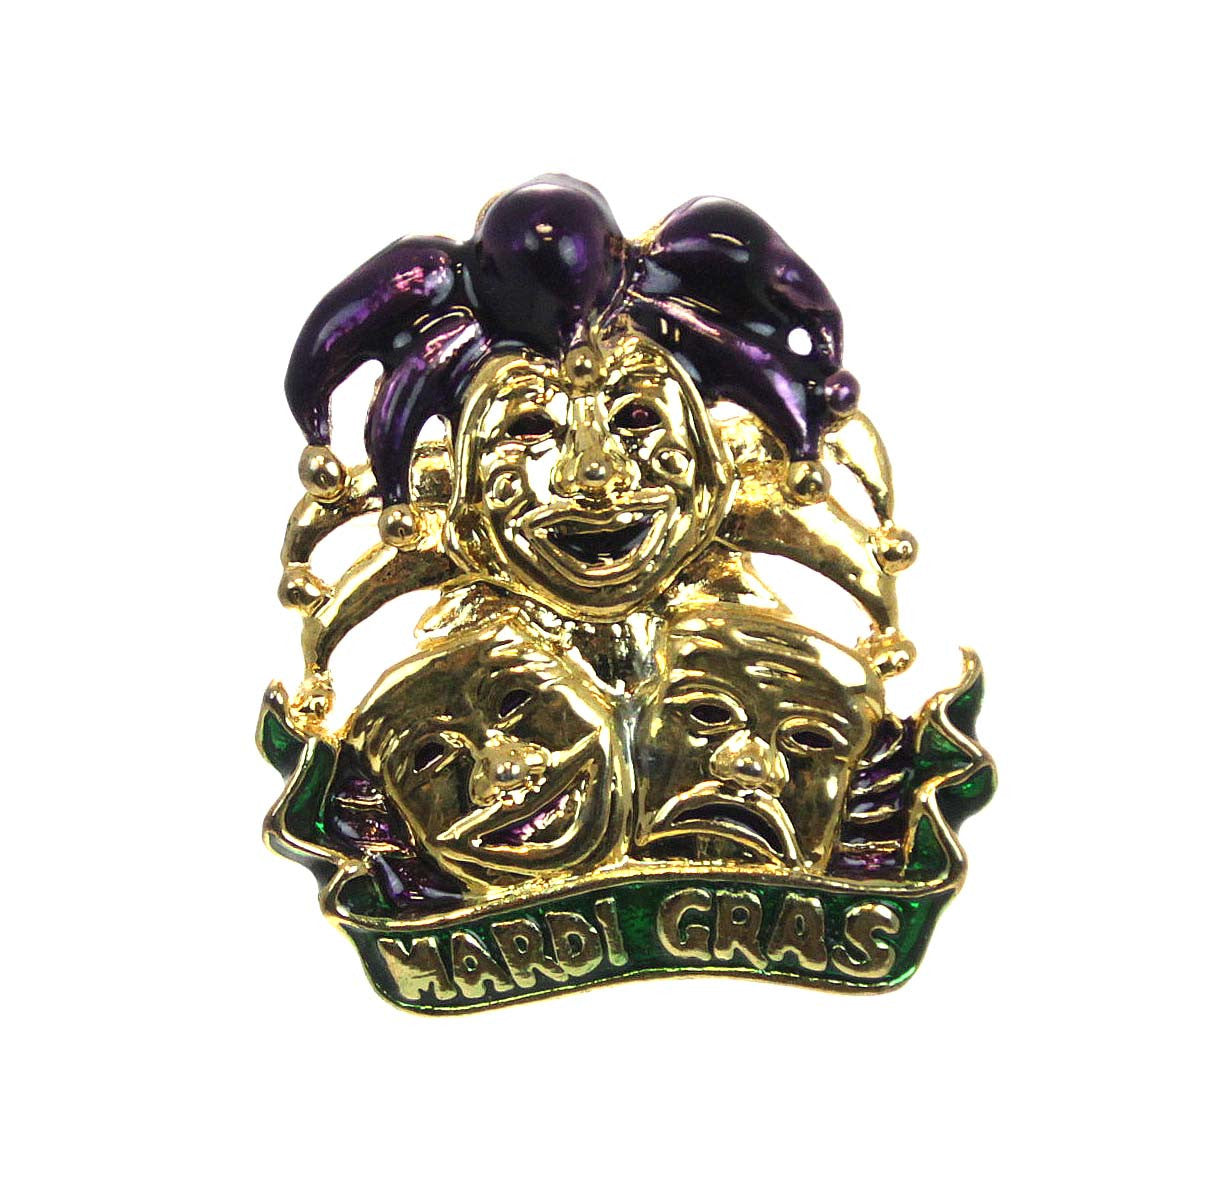 Jester & Comedy & Tragedy Pin, Gold